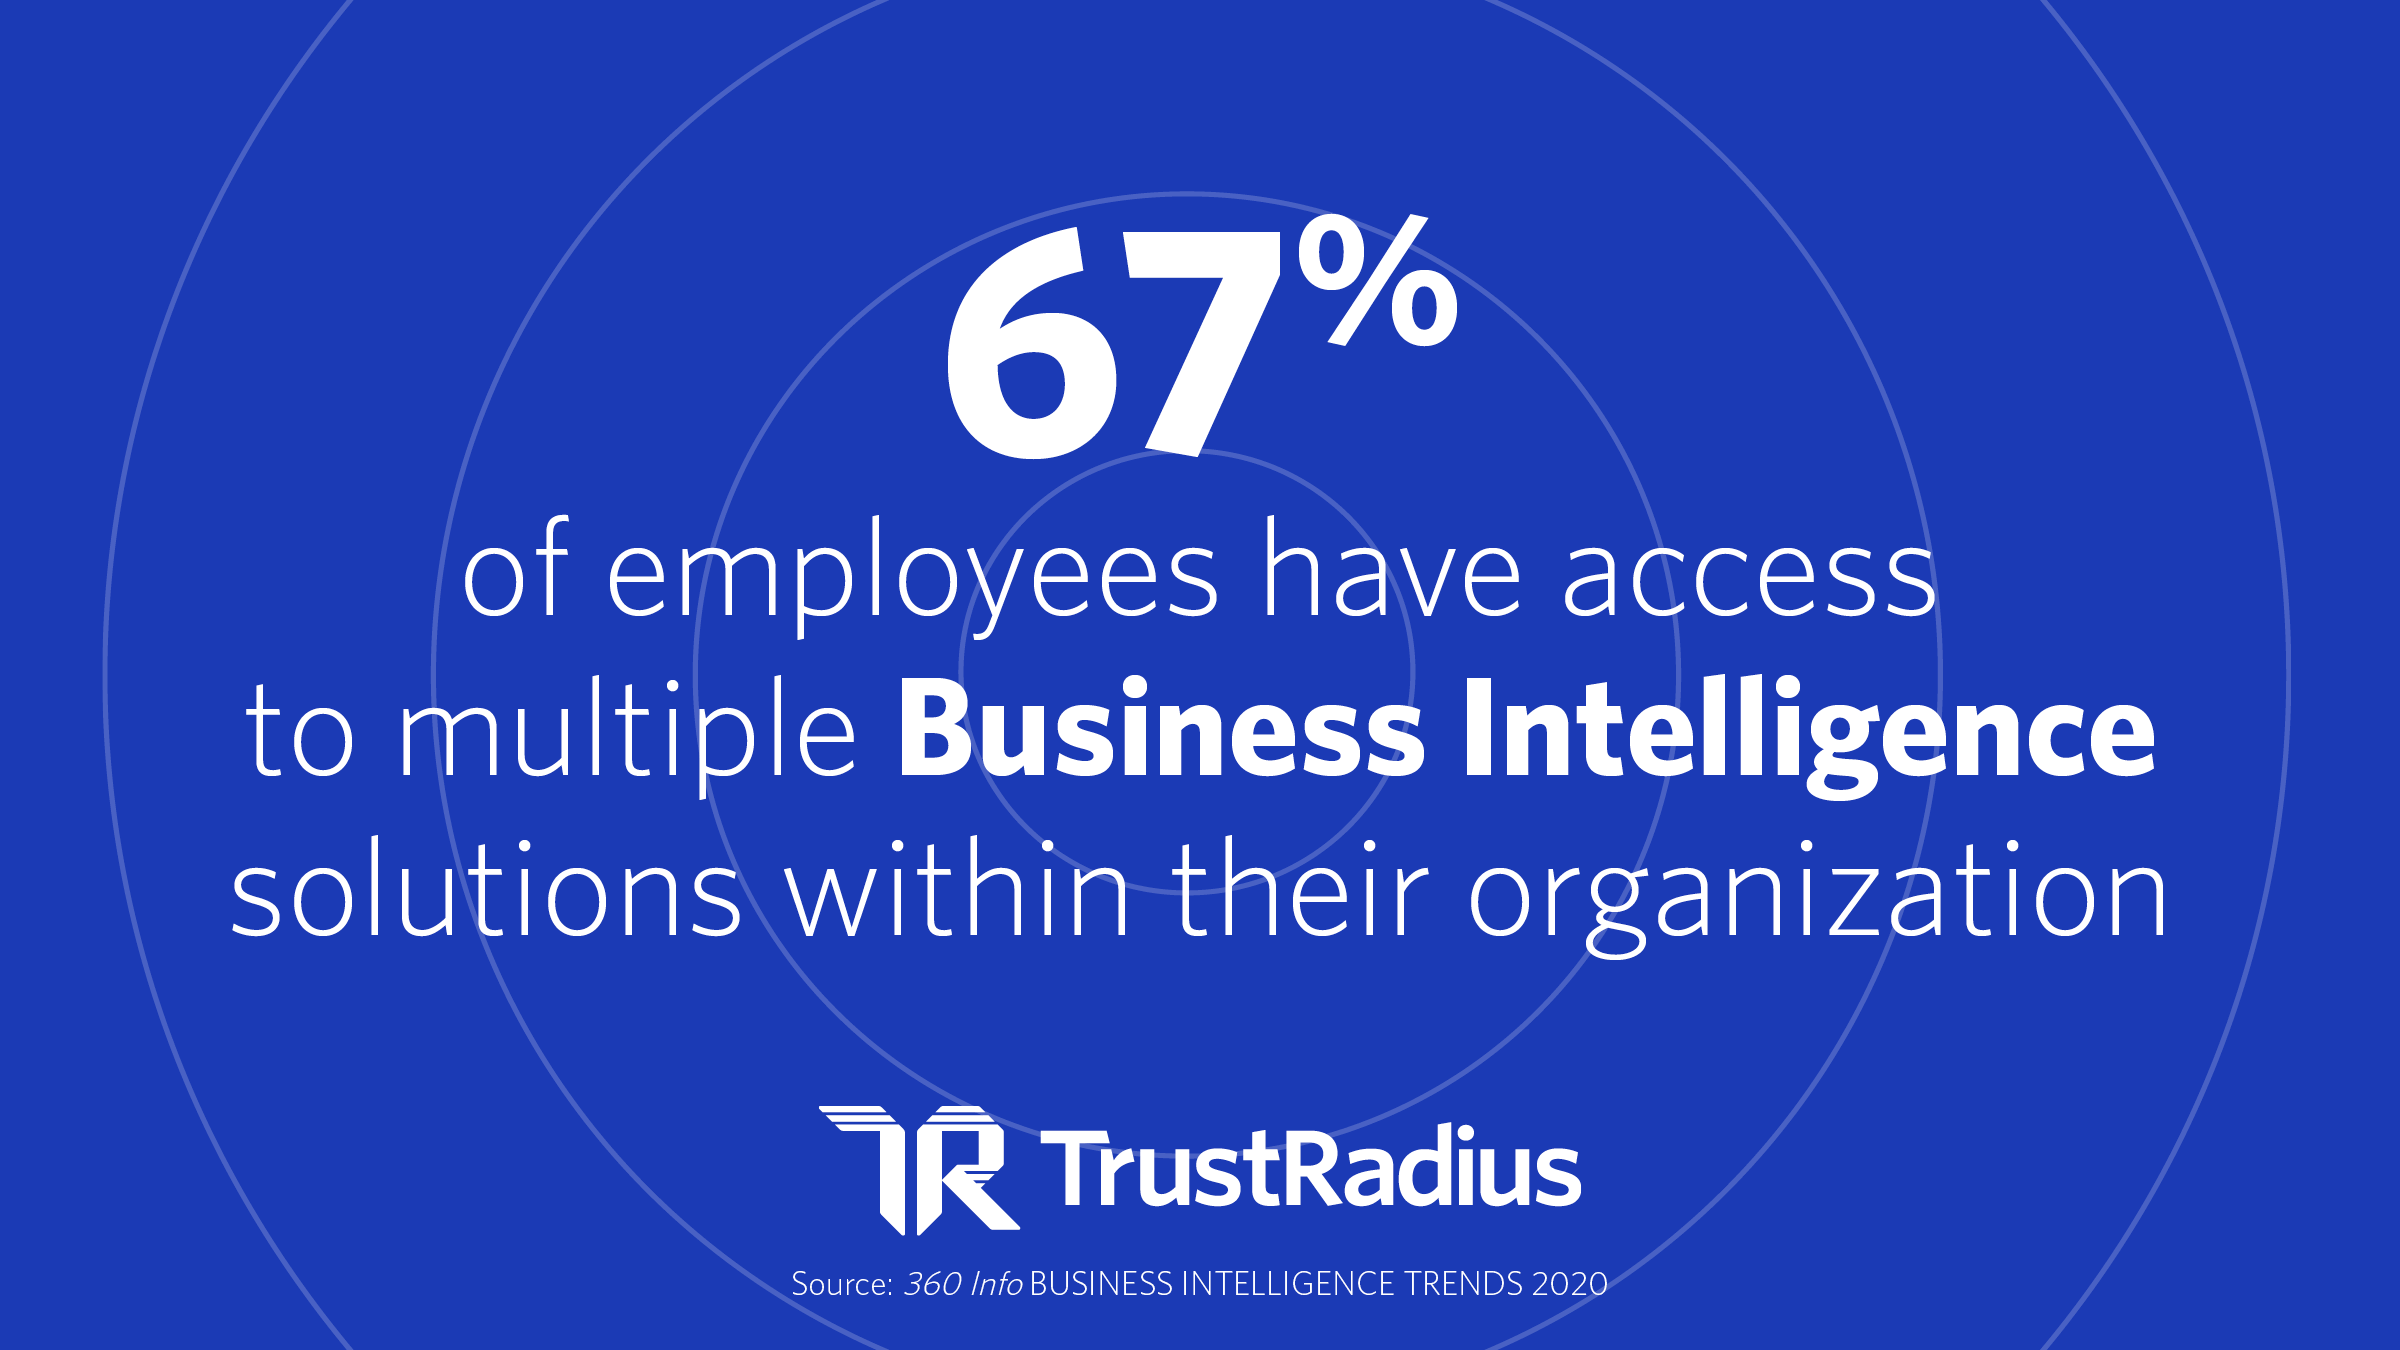 67% of employees have access to multiple Business intelligence solutions in their organization